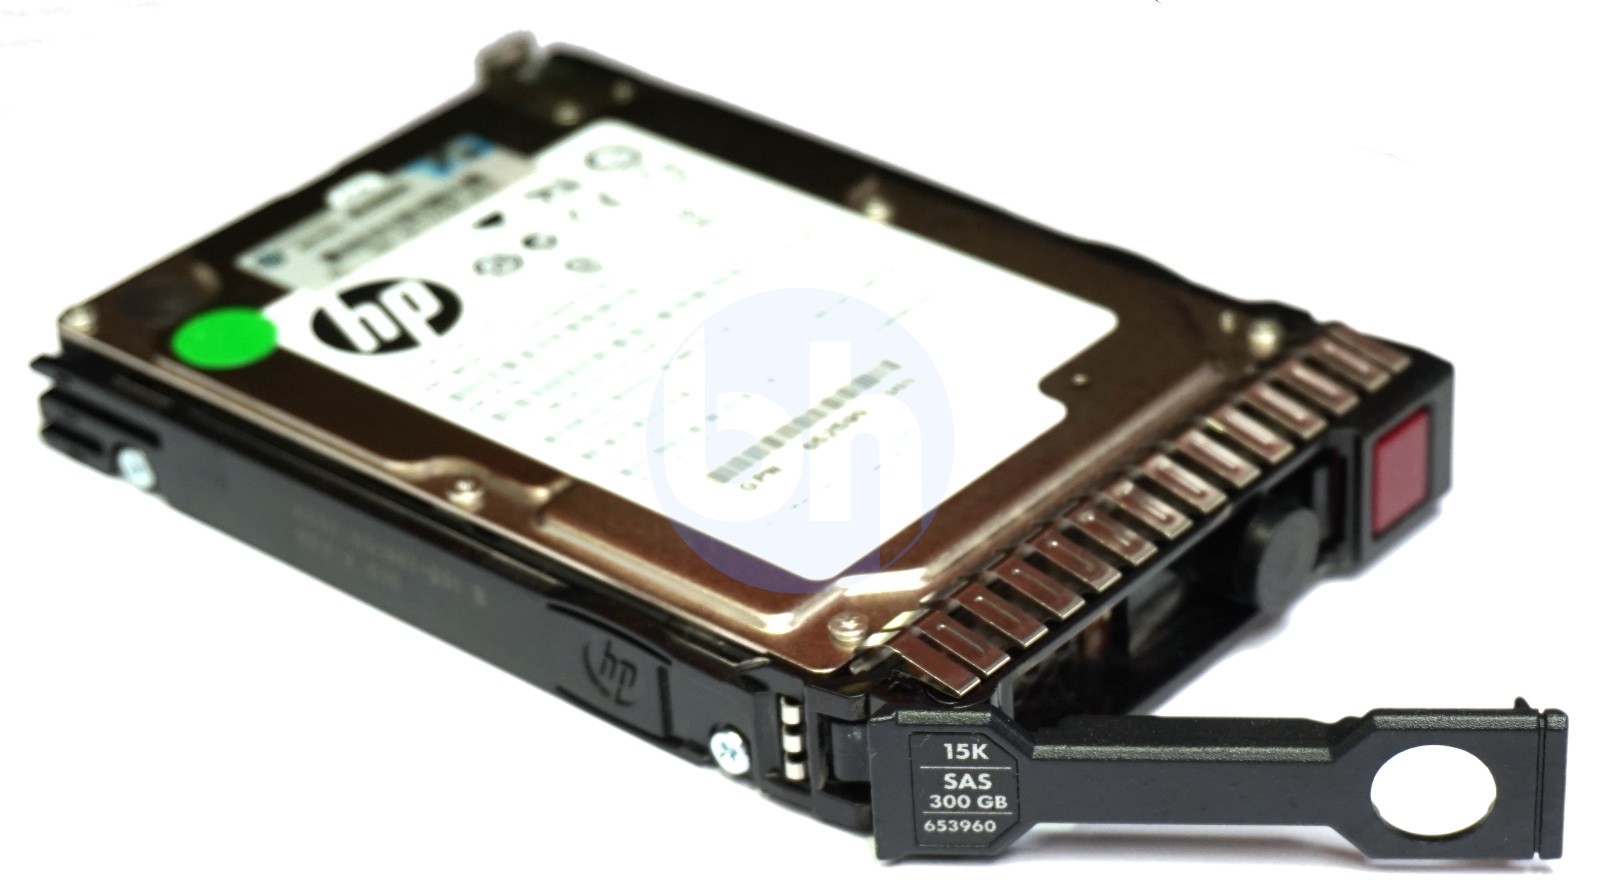 HP (653960-001) 300GB SAS-2 (2.5") 6Gbps 15K HDD in Smart Carrier Caddy